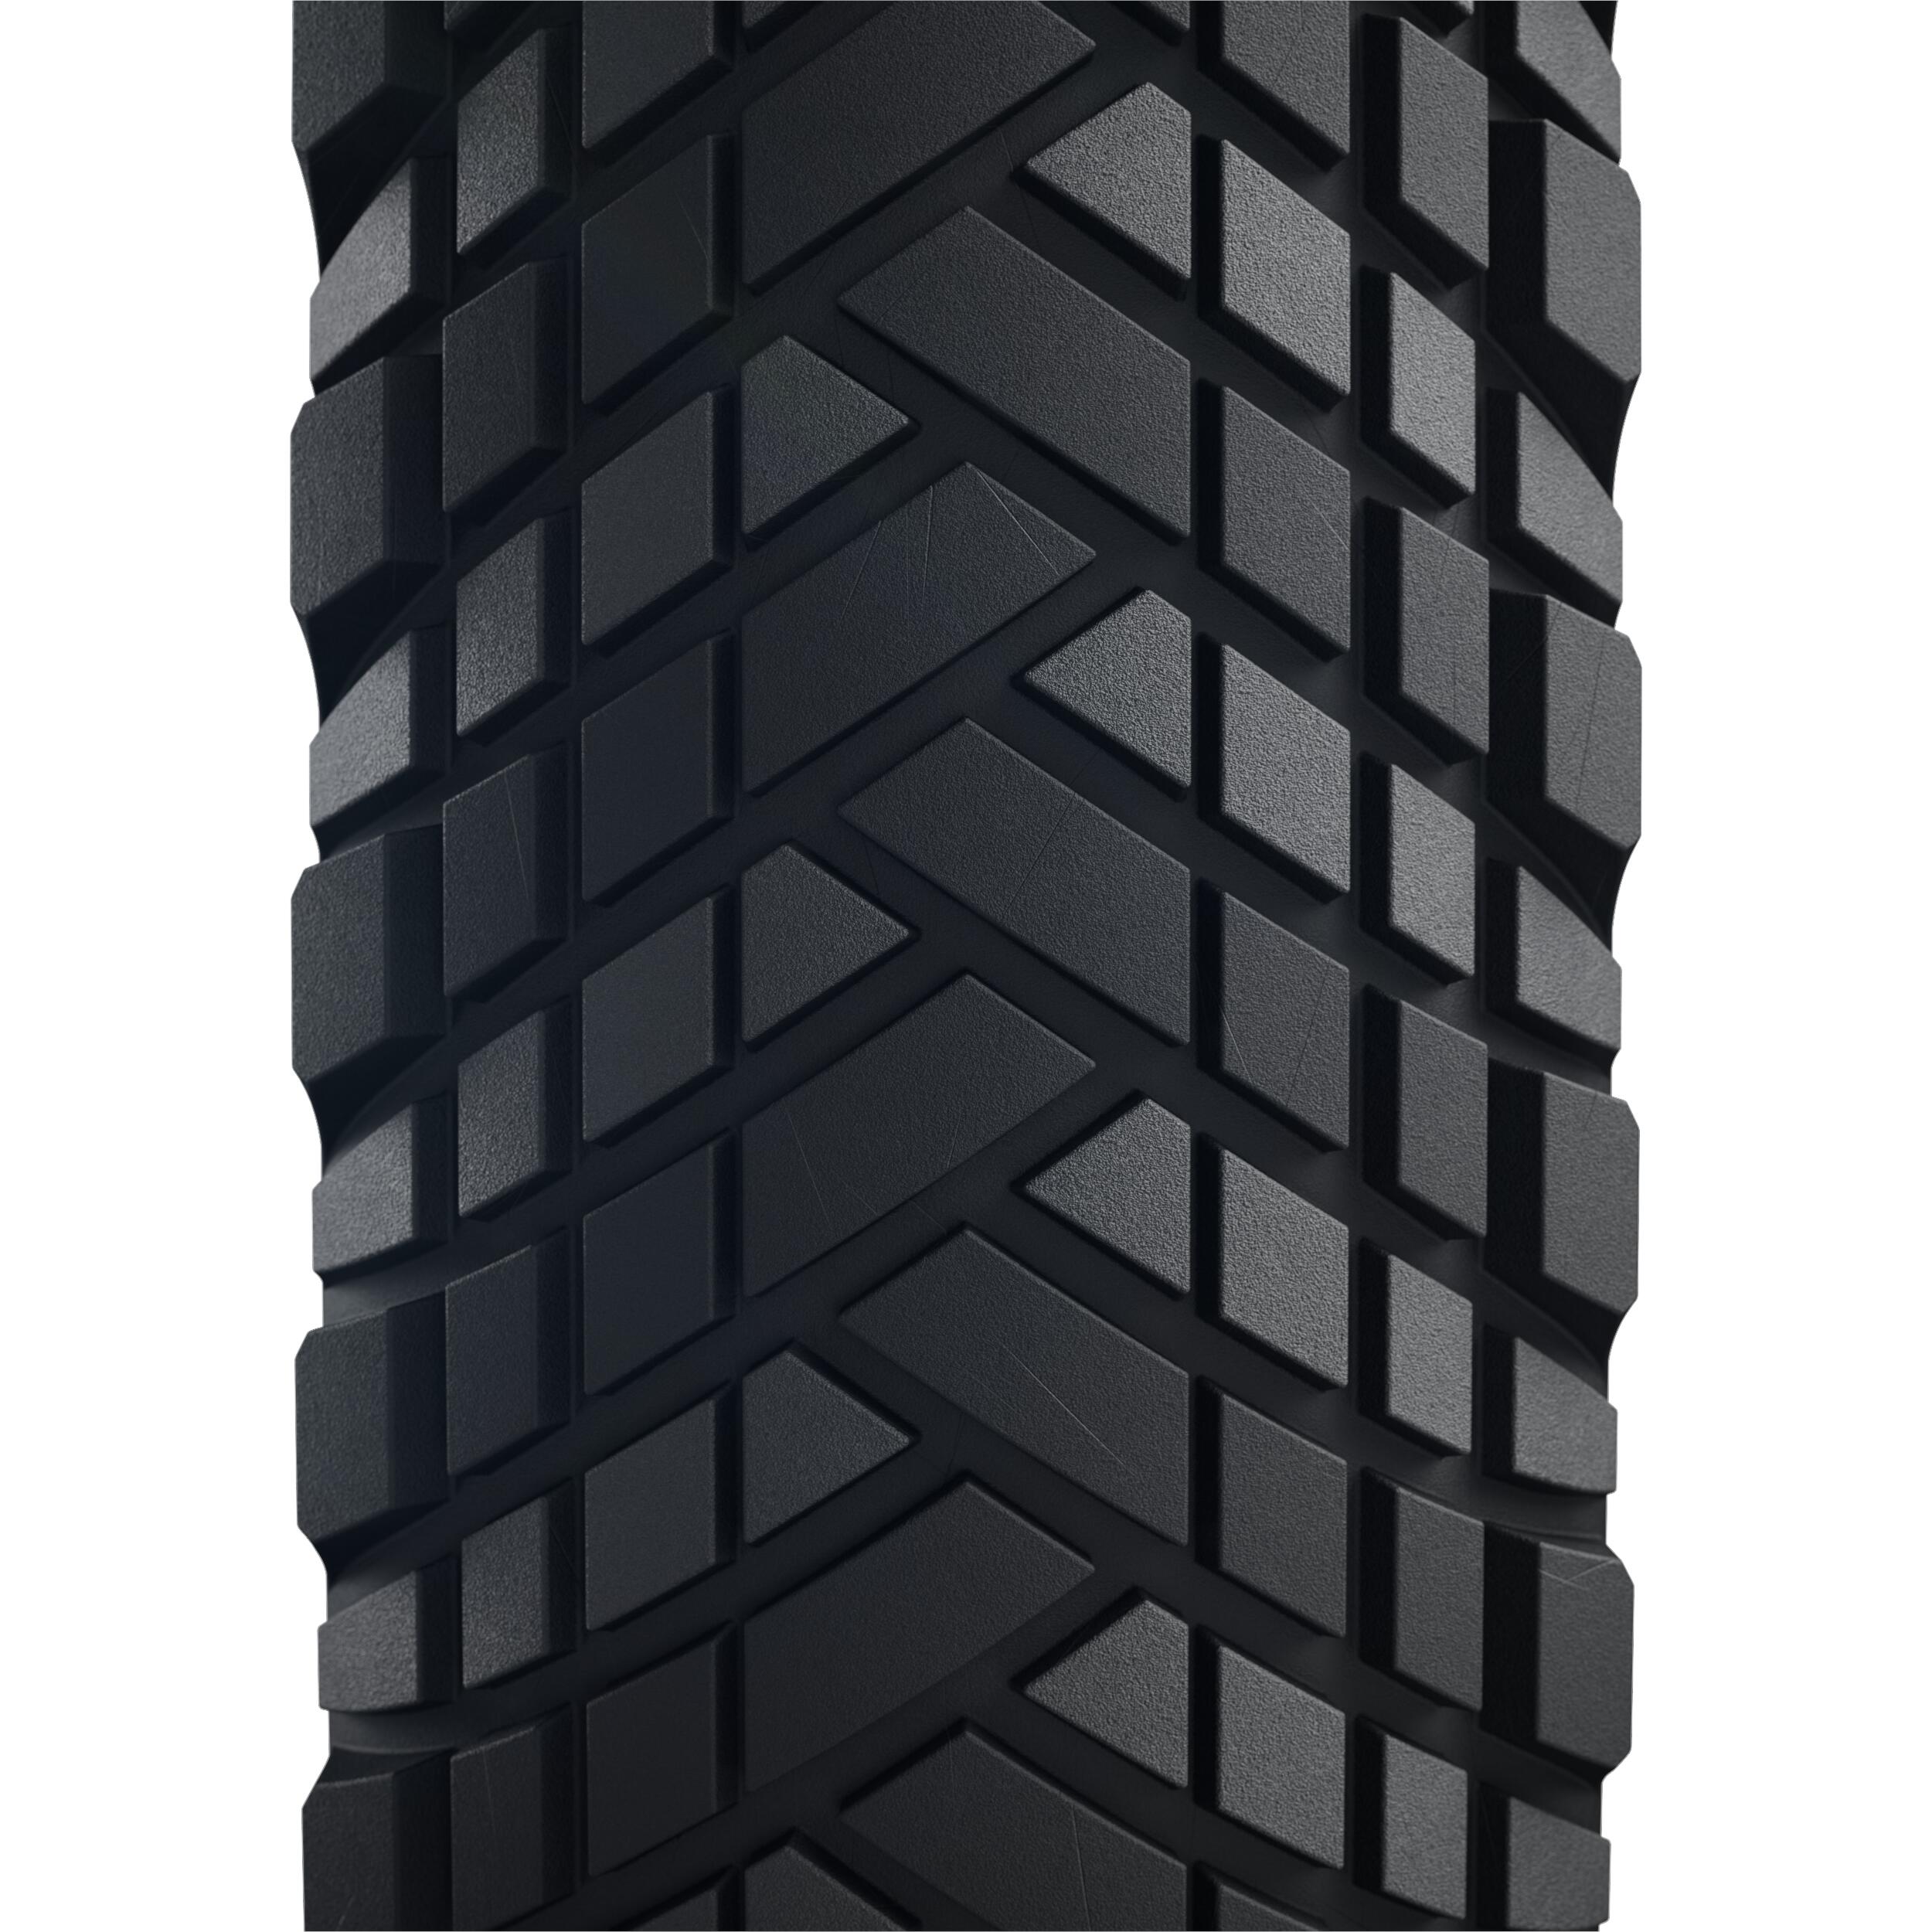 Puncture-Proof Hybrid Electric Bike Tyre RoadProtect+ 700 x 47 mm 2/4